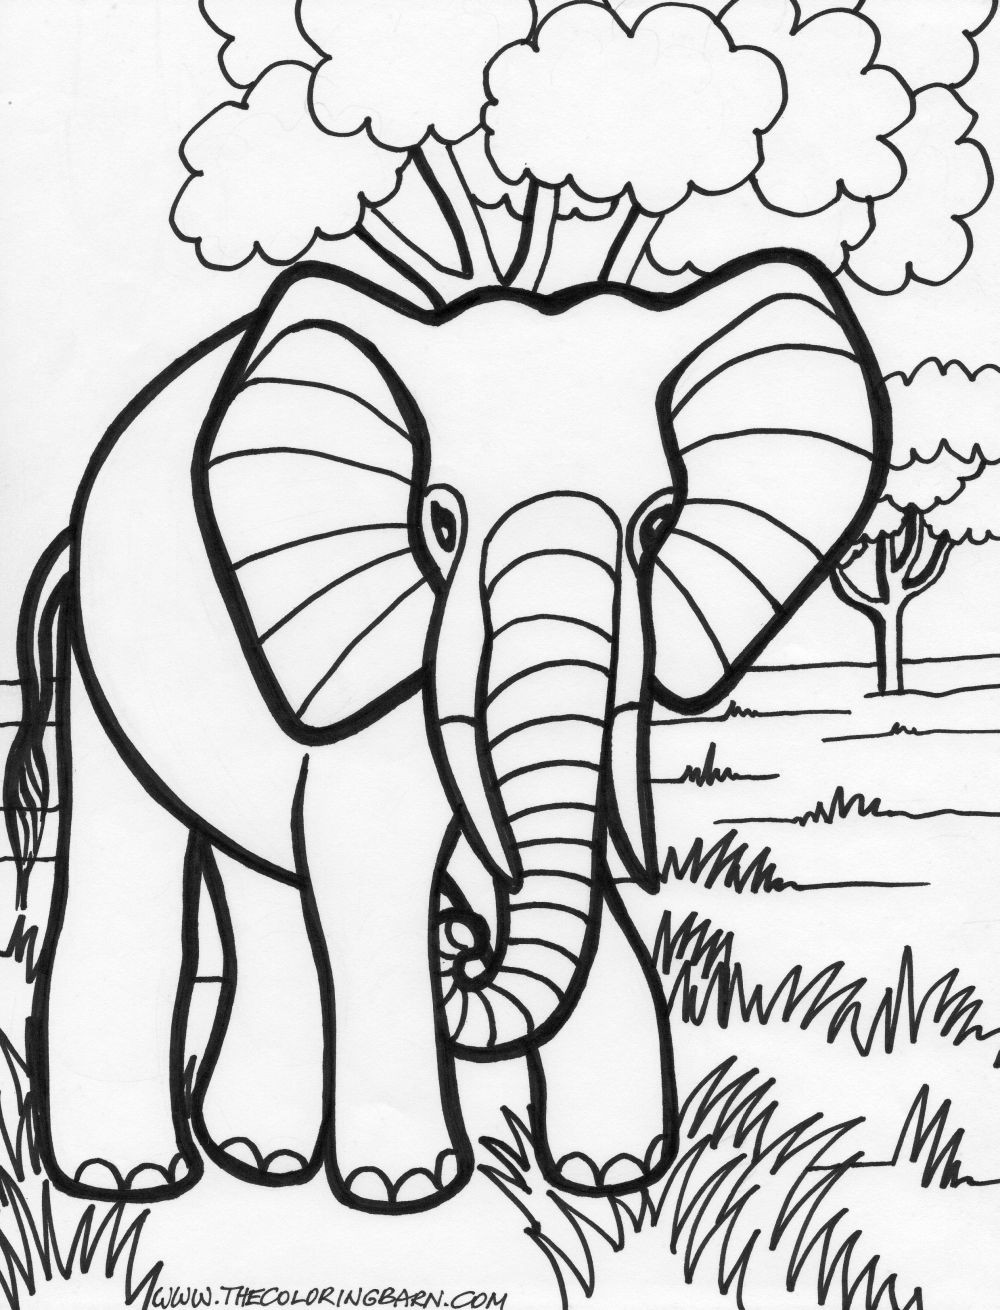 Coloring Book Pages For Kids
 transmissionpress 14 Elephant Coloring Pages for Kids